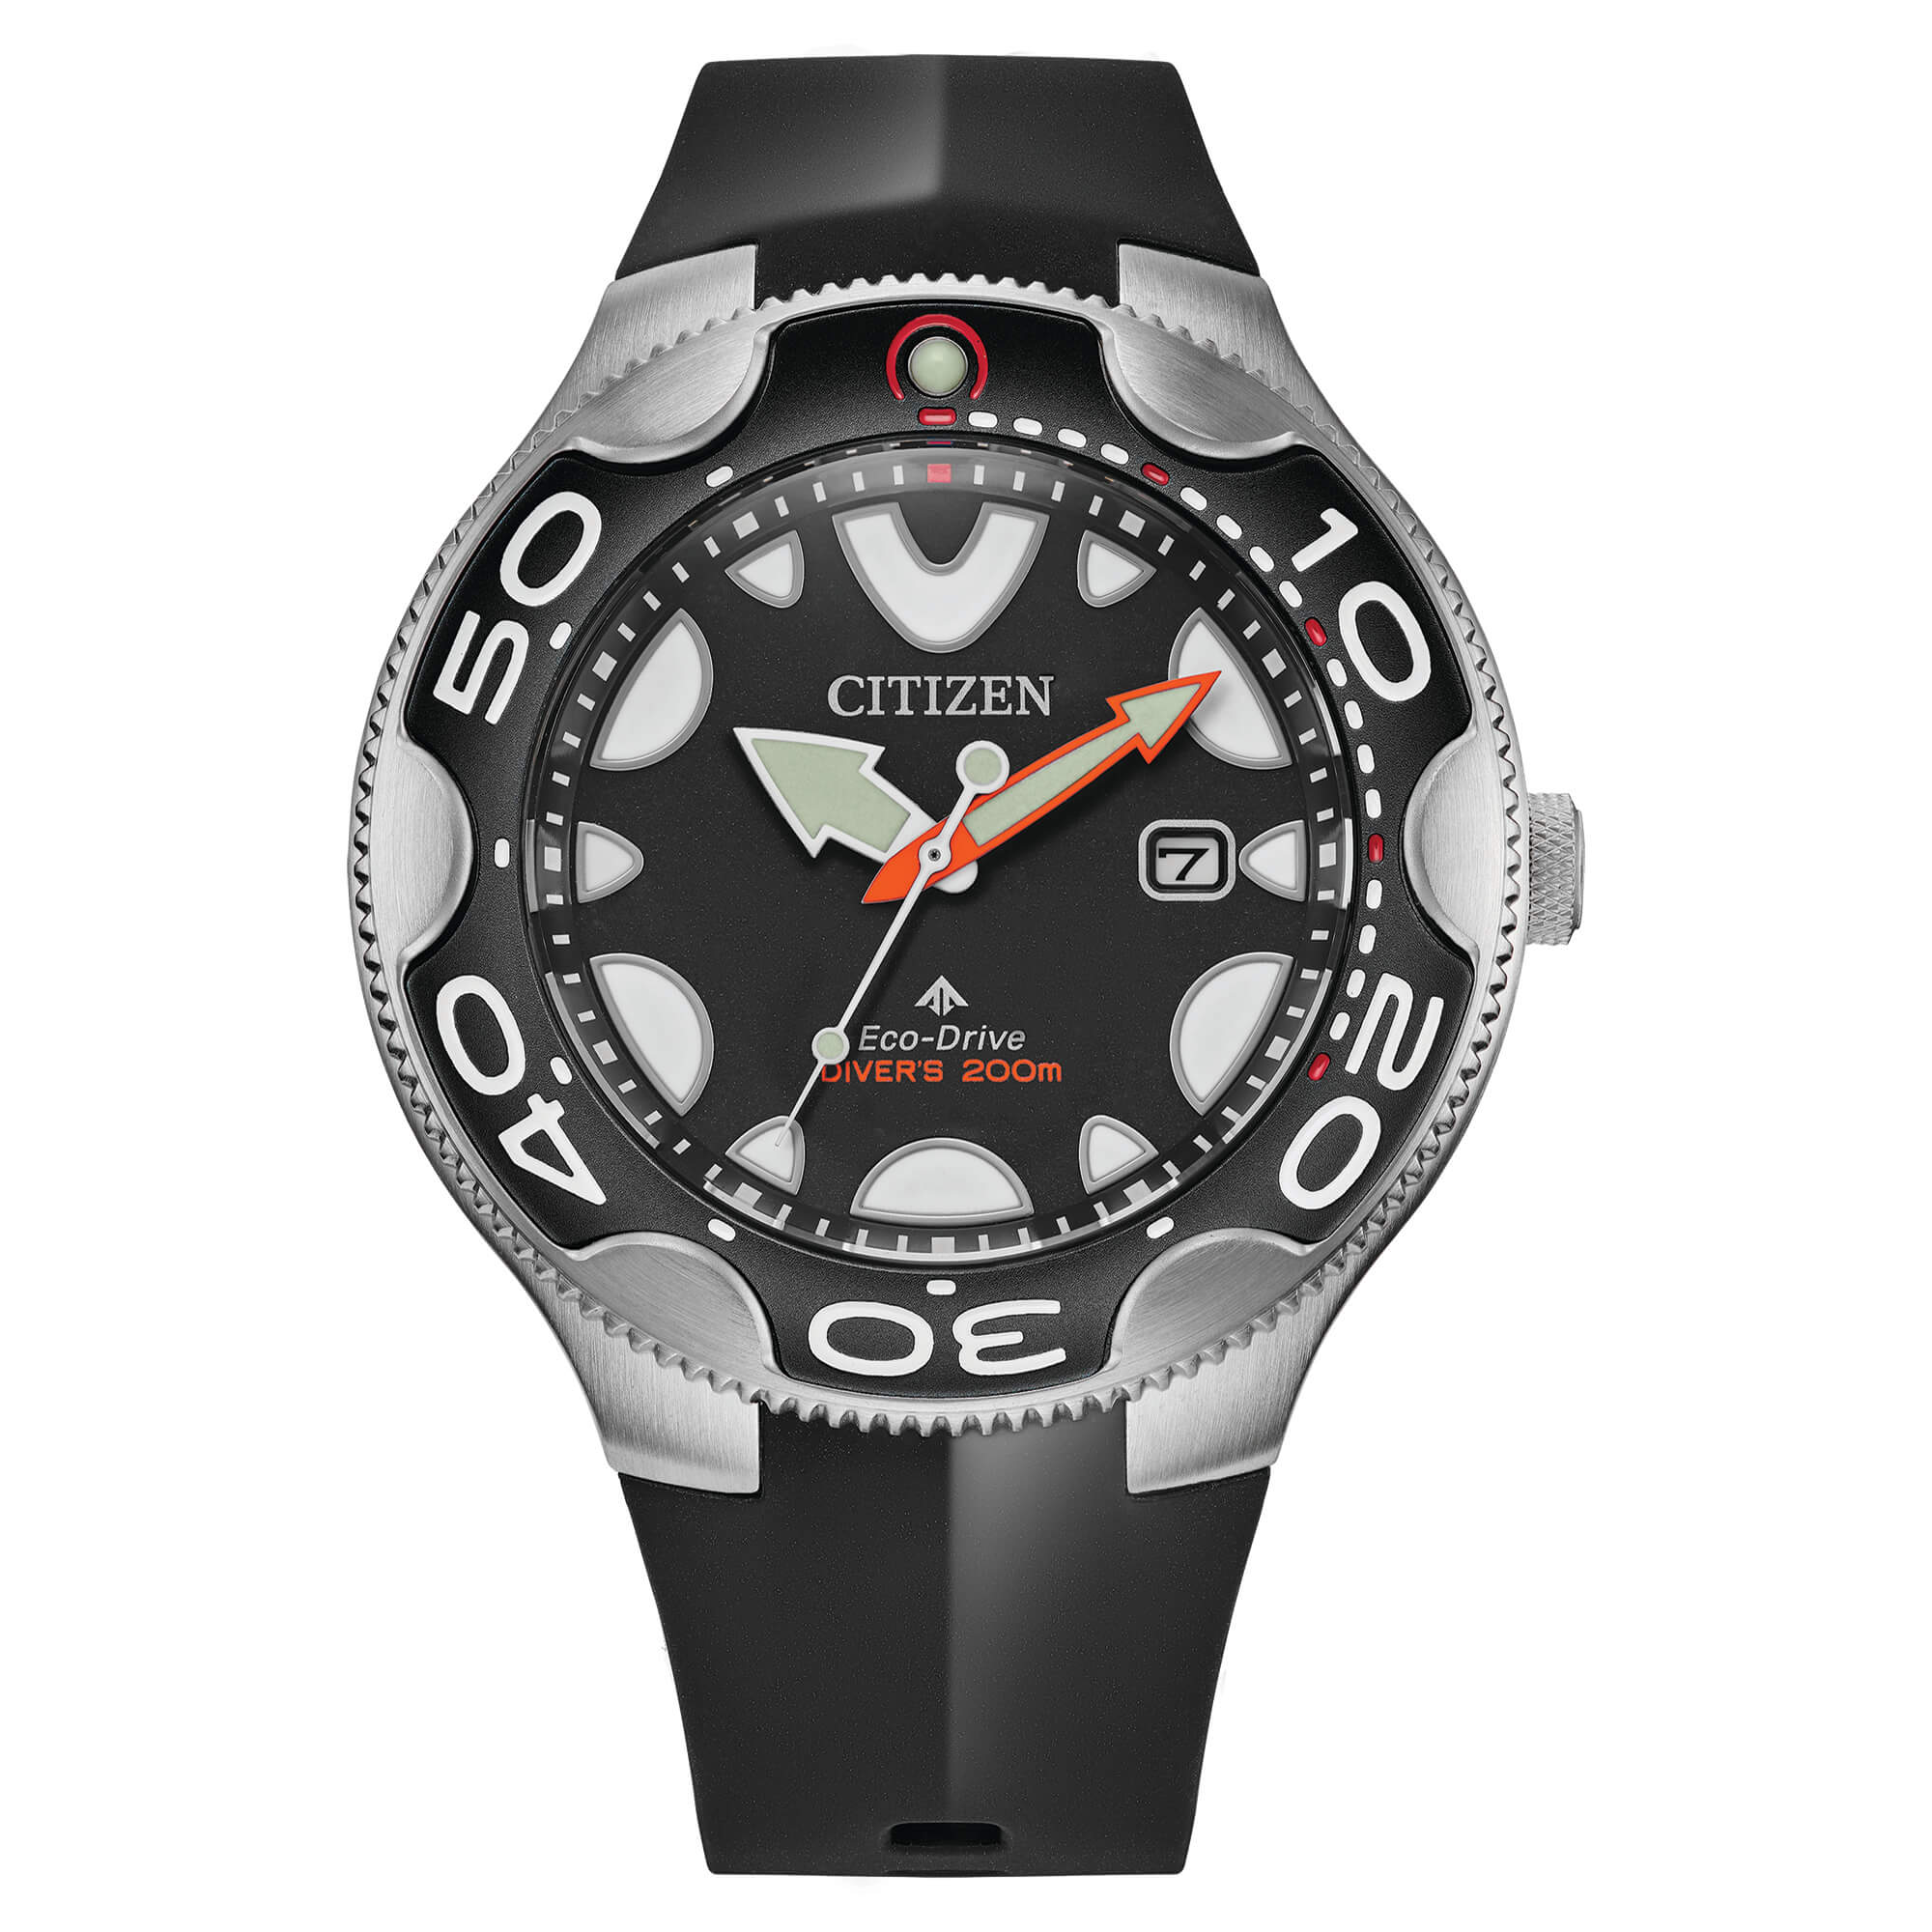 Diver's Eco Drive 200 m "Orca", Collection OF, 46mm - BN0230-04E